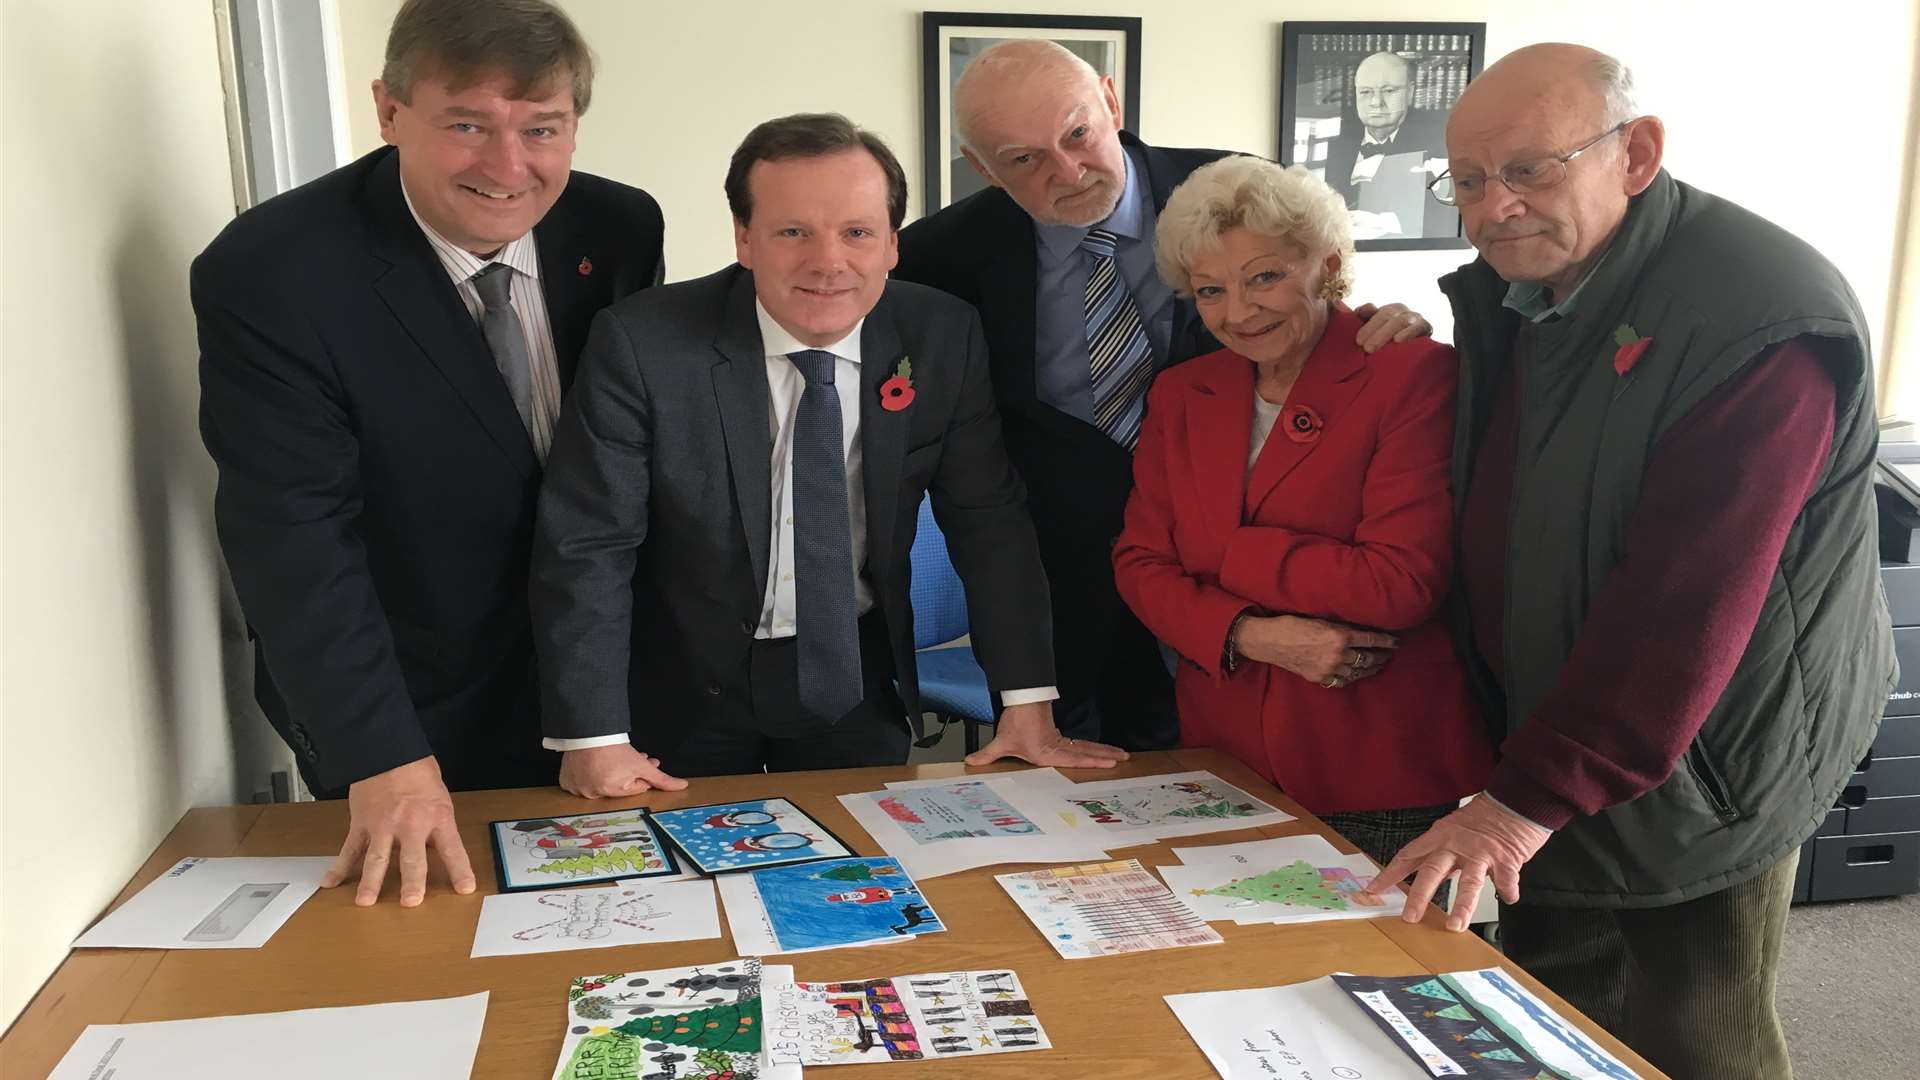 Judging the best Christmas card design: Keith Morris, leader of Dover District Council, MP Charlie Elphicke, Roger Walkden, deputy mayor of Dover, Ann Jenner, Dover town councillor, and Keith Lee, Deal town councillor